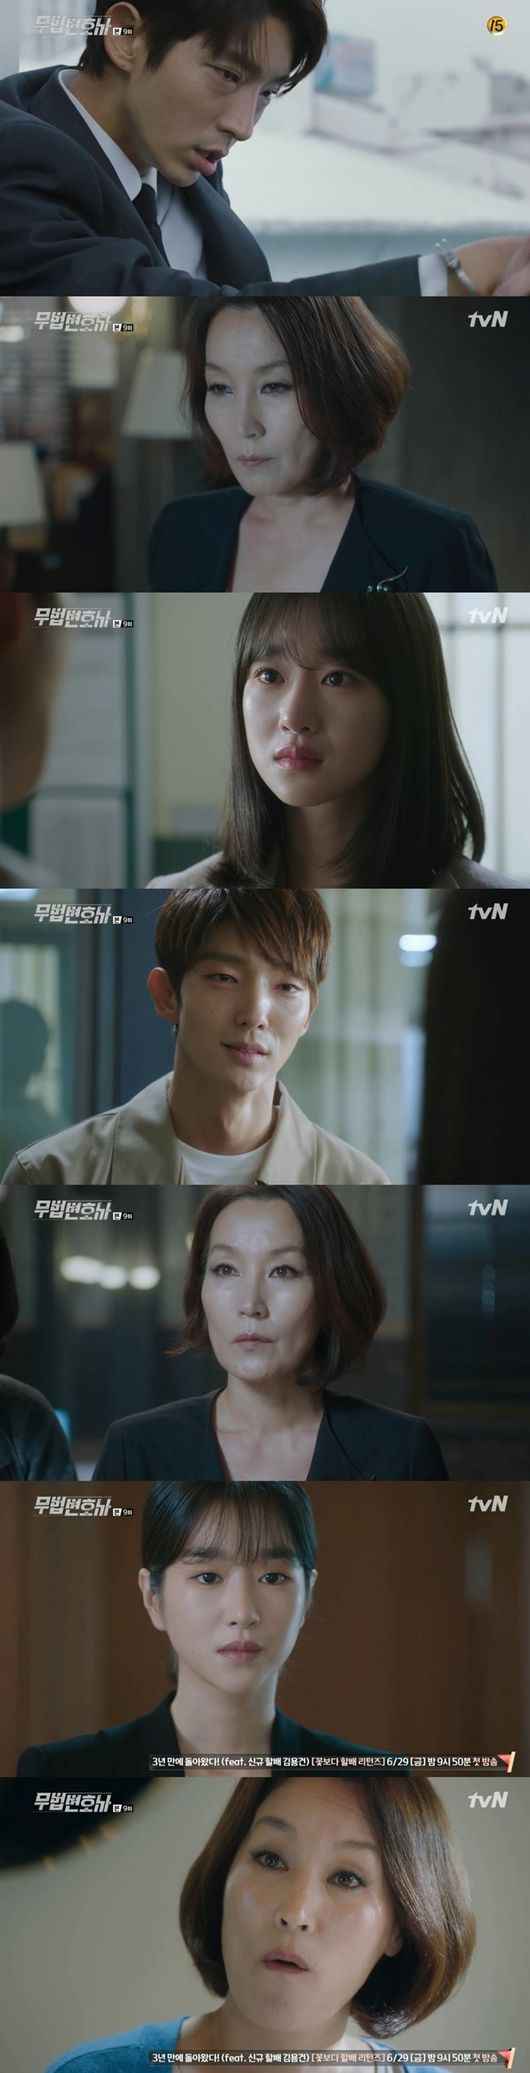 Unlawful lawyer Lee Joon-gi is again in Danger: Can Seo Ye-ji uncover Lee Joon-gis innocence?In the 9th episode of the cable channel tvN Saturday Drama Unlawful Lawyer (played by Yoon Hyun-ho and directed by Kim Jin-min), which was broadcast on the afternoon of the 9th, Ha Jae-yi was shown trying to prove the innocence of Bong Sang-pil (Lee Joon-gi), who wrote Murder An Innocent Man.Bong was arrested after writing An Innocent Man, who killed his uncle, For Heroes (the guide).An Innocent Man was written by his nephew who stabbed his uncle and dropped him from the rooftop. Ahn Oh-ju (Choi Min-soo), who worked, was shameless.Cha Moon-sook (Lee Hye-young), who knew the truth, was uncomfortable to plant.As Bong Sang-pil was hit by Danger, Ha Jae-i was embarrassed: Lawless Lawyer firms were seized and searched; prosecutors found anesthetics in law firm offices, and office staff were surprised.Huh Jae-yi hurried to see Bong Sang-pil, and Bong Sang-pil, who was shocked by the death of Choi For Heroes, was distressed.Ha Jae-yi decided to go to the defense of Bong Sang-pil himself, and he tried to protect Bong Sang-pil, and he was trying to protect the employees who were called to the police station as a reference.Ha Jae-yi visited Judge Cha Moon-sook, who said he would take on the defense of Bong Sang-pil and asked Cha Moon-sook to let him carry out the funeral of Choi For Heroes himself.Cha Moon-sook told Ha Jae-yi to accept Bong Sang-pils innocence on that condition, and Ha Jae-yi, who bowed his head to Cha Moon-sook, allowed Bong Sang-pil to attend the funeral of Choi For Heroes.Bong was in pain, more fond of him because he was the only family he had ever lived in, and he was sorry for driving him to death.Ha Jae-yi, who saw such a Bong Sang-pil, was also hard.An Oju went to Bong Sang-pil, who was angry when he asked why he killed Choi Heroes and put An Innocent Man on him.An Oju told an angry Bong Sang-pil, You are a highlight; if you want to save your people, dont breathe in it, Blackmail – Cinémix Par Chloé.Bong Sang-pil stimulated him by telling An-oh that Cha Moon-sook told Ha Jae-yi that he had tried Yi Gi.Ha Jae-yi went under investigation to exonerate Bong Sang-pil, but it was not as easy as the planned An Innocent Man.Cha Moon-sook provoked the river Michelle Chen (Cha Jung-won) by saying, Can you beat Ha Jae-yi?Anoju was also troubled by the fact that Cha Moon-sook told Bong Sang-pils lawyer that he was Yi Gi.Ha Ji-ho (Lee Han-wi), Ha Jae-yis father, visited his daughter and tried to go home together.Ha Jae-yi was embarrassed by the story that he was in charge of Bong Sang-pils defense, and Ha Jae-yi told his father that he loved Bong Sang-pil.Ha Jae-yis mother, Noh Hyun-joo (Baek Joo-hee), heard about the incident and added interest by recalling her meeting with For Heroes.Ha Jae-i stood at Bong Sang-pils trial.Prosecutor Michelle Chen claimed that Bong sang for For Heroes, blackmail – Cinémix Par Chloé, fatally wounded with a knife, and eventually dropped it off the roof to kill him.He also explained that Bong Sang-pil made it impossible to resist by administering procaine to Choi For Heroes and found the drug in Bong Sang-pils office.An eyewitness, who was pre-conducted by An O-ju, also appeared at the trial, claiming that Bong had dropped the dead man from the roof.Ha Jae-yi questioned how he could be sure that the distance between the scene of the incident and the Innocent Witness was quite far away.Then he used the billboard photos on the scene to question again whether he was sure that Innocent Witness was accurate, and Innocent Witness was embarrassed.Chun Seung-beom (Park Ho-san) claimed that Bong Sang-pil killed Choi For Heroes and tried to receive death insurance.Choi For Heroes opposed Bong Sang-pil to settle in the city, and the relationship between the two was broken.In the end, Bong Sang-pil claimed to be an anti-human Murder criminal who betrayed Choi For Heroes, killed him and tried to get death insurance.Noh went to the photo studio of Ha Jae-yis father, and caught Ha Jae-yi because he needed a photo of the proof, and Ha Jae-yi recalled his mother by taking a picture of Roh Hyun-joo.However, with the appearance of Ha Gi-ho, Noh Hyun-joo left his seat in a hurry.Noh Hyun-joo went back to Ha Jae-yi and handed her a picture of Choi For Heroes before she died, working as a chiropractor for Judge Cha Moon-sook.Noh Hyun-joo added to Ha Jae-yi, I am also fighting Cha Moon-sook.Bong was again in Danger: meeting a colleague in the prison with the organization of For Heroes.And he attacked Bong Sang-pil, not believing that Bong Sang-pil did not kill Choi For Heroes.But Bong Sang-pil tried to protect him and was hit by the Danger of Death.TVN broadcast screen capture